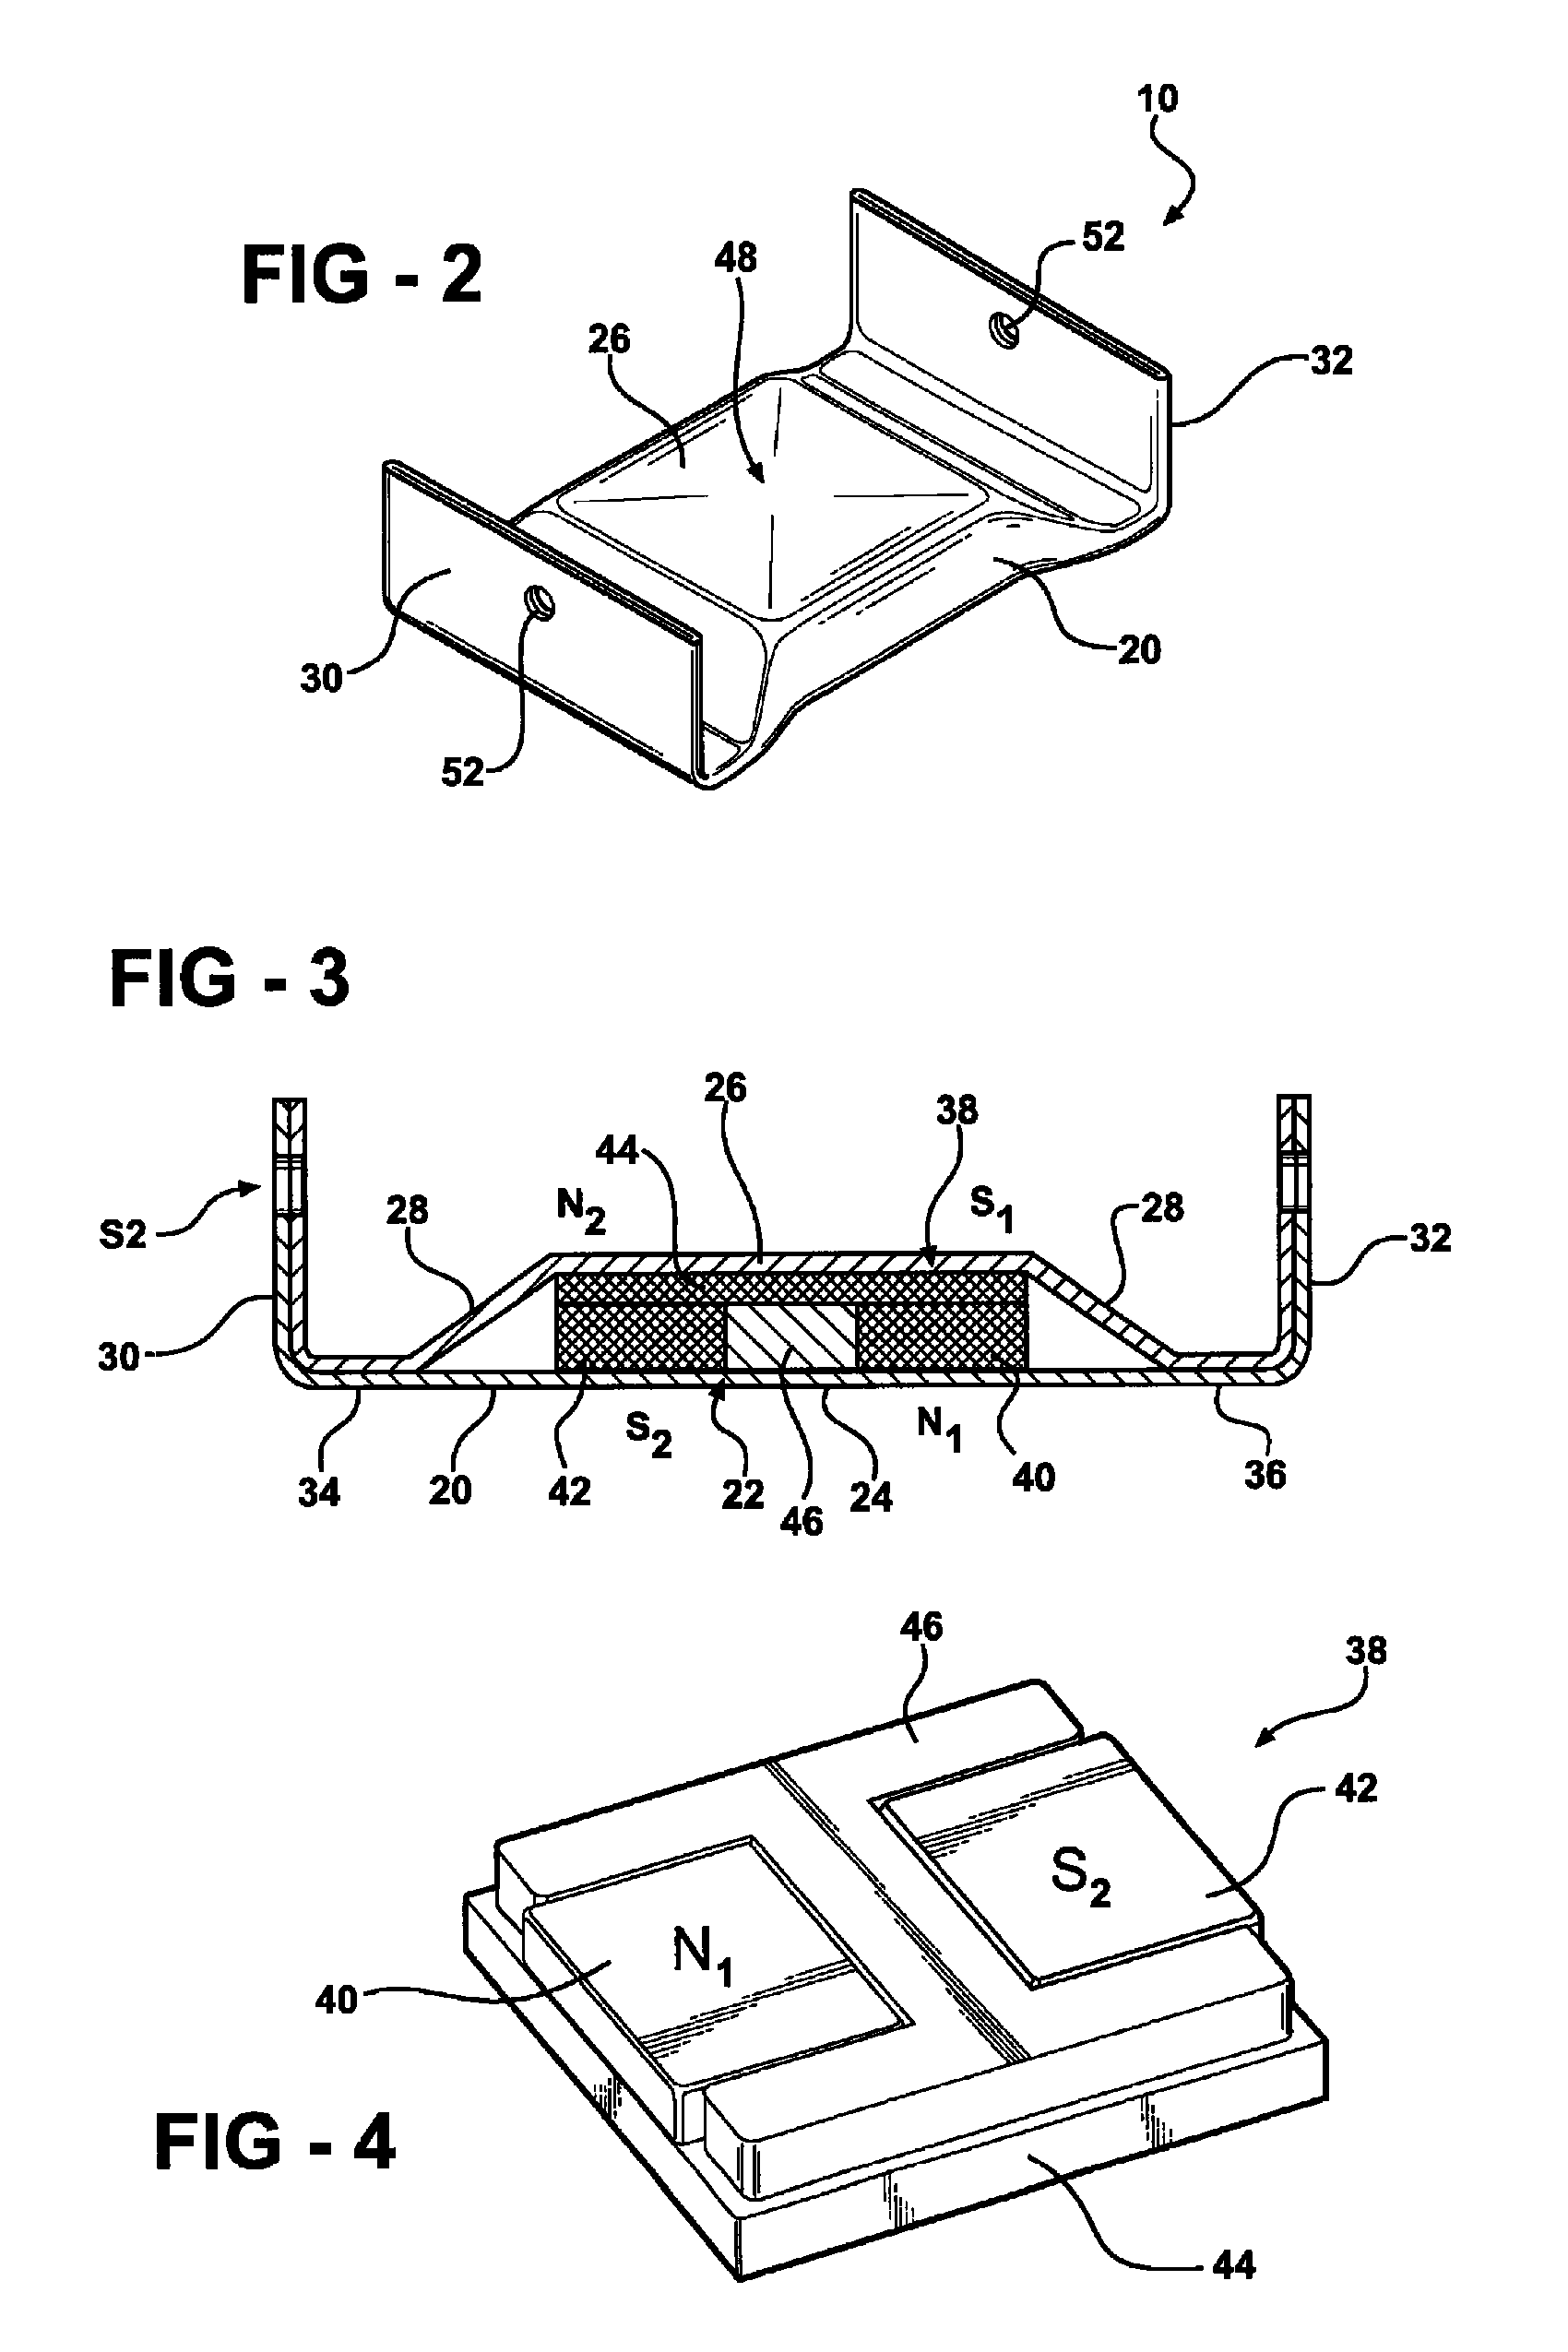 Magnet assembly for a conveyor system